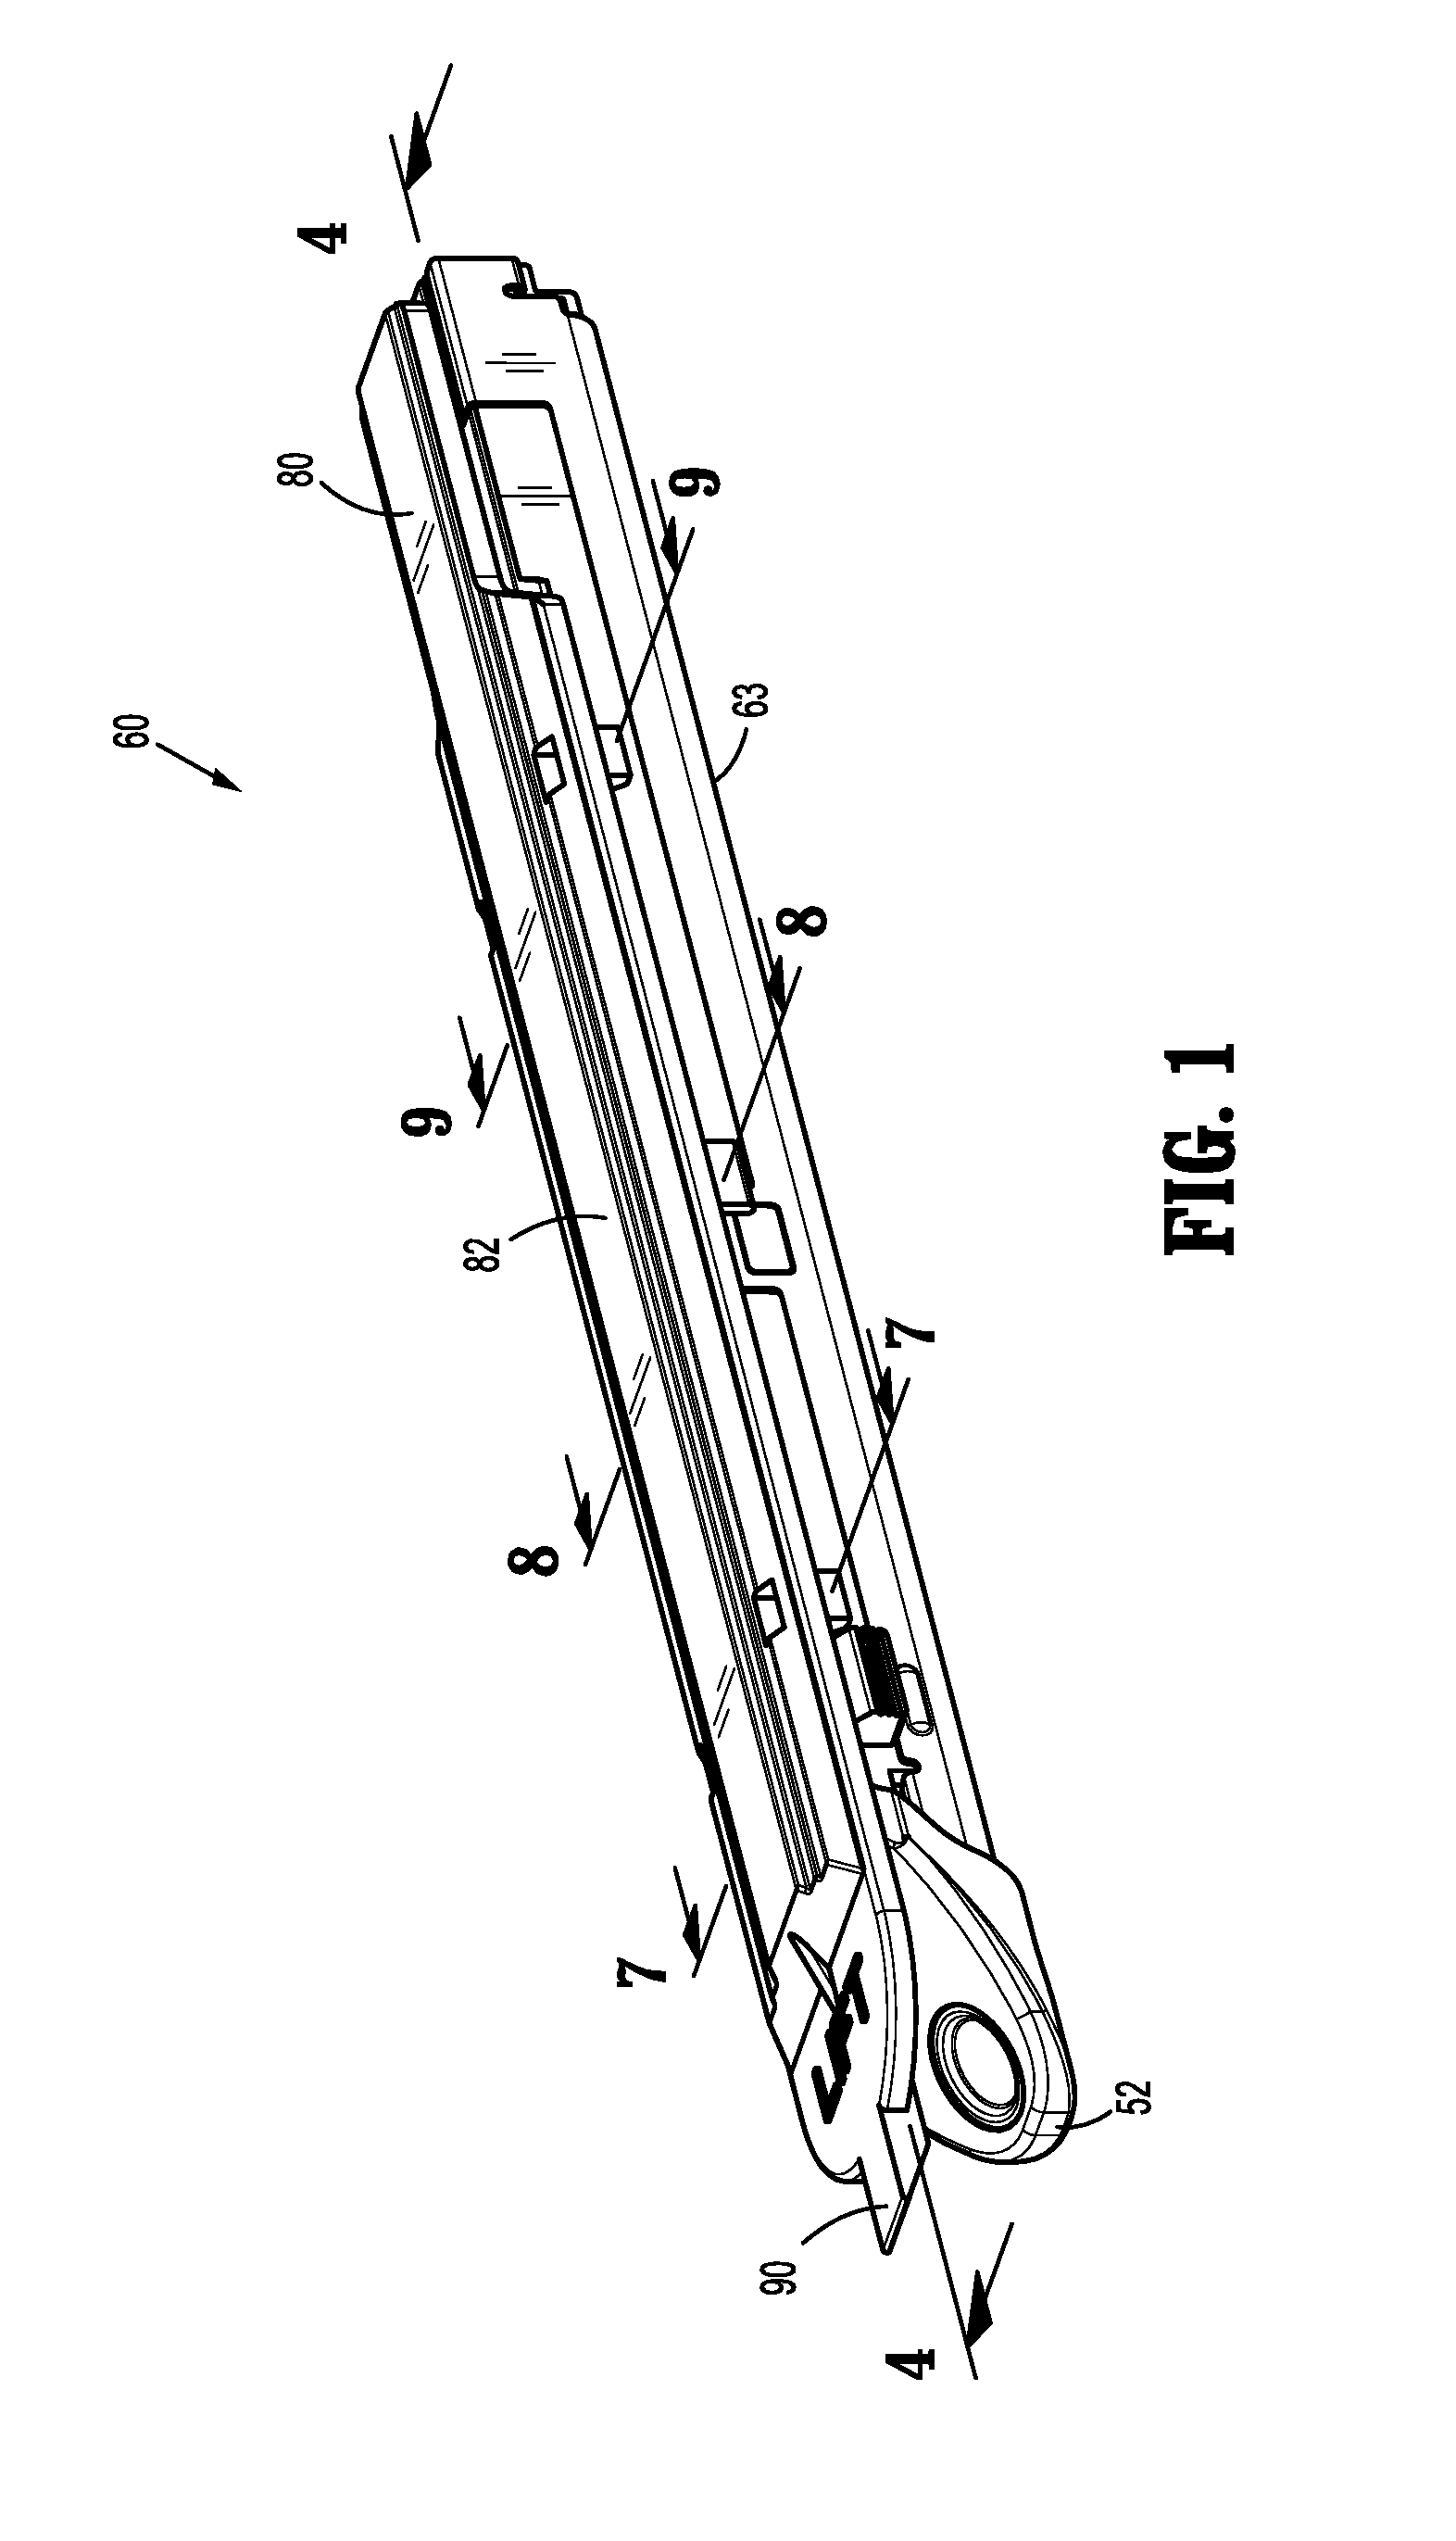 Staple cartridge with shipping wedge